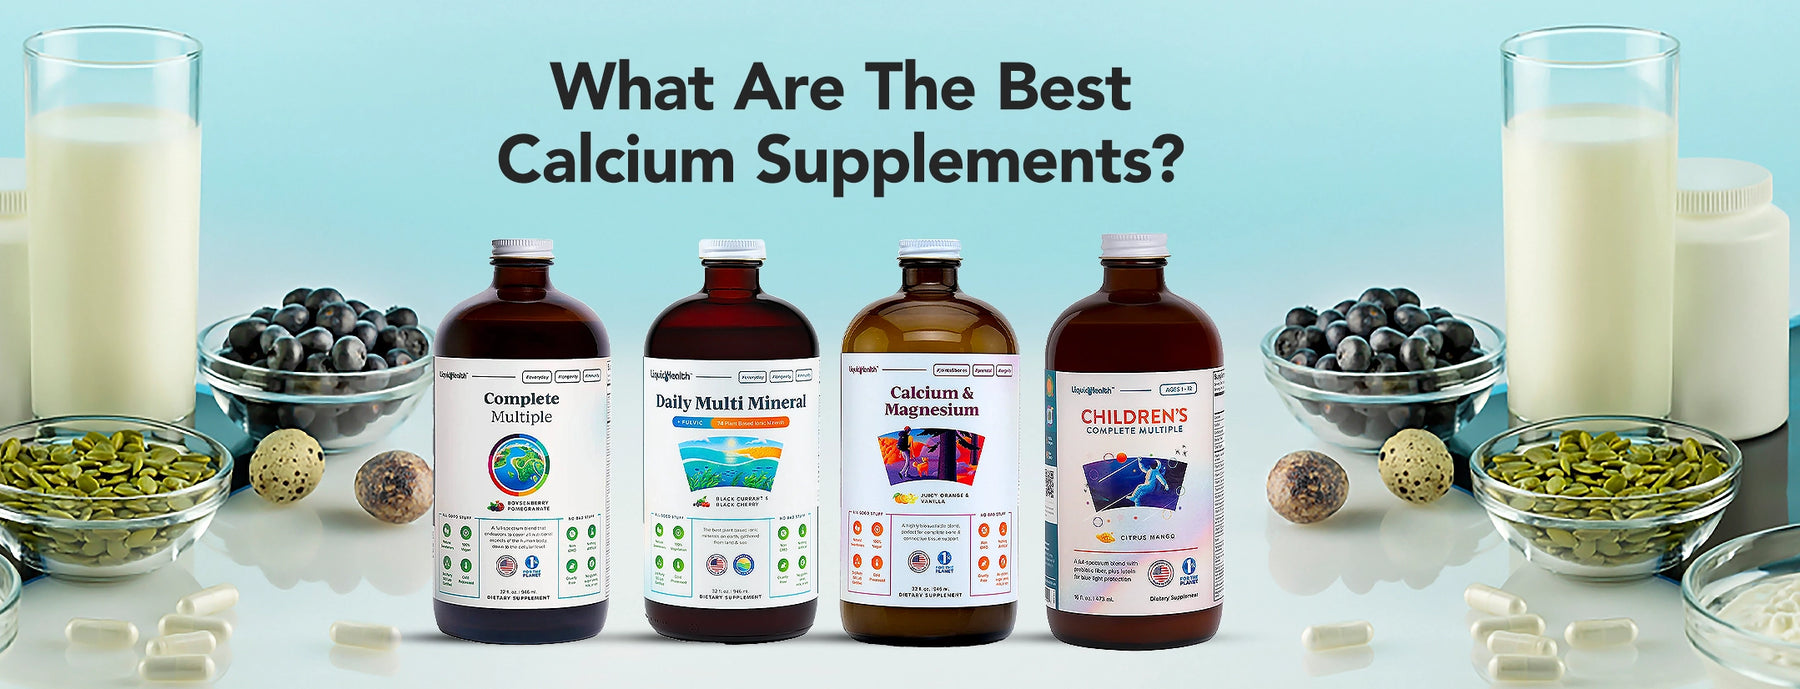 What Are The Best Calcium Supplements?